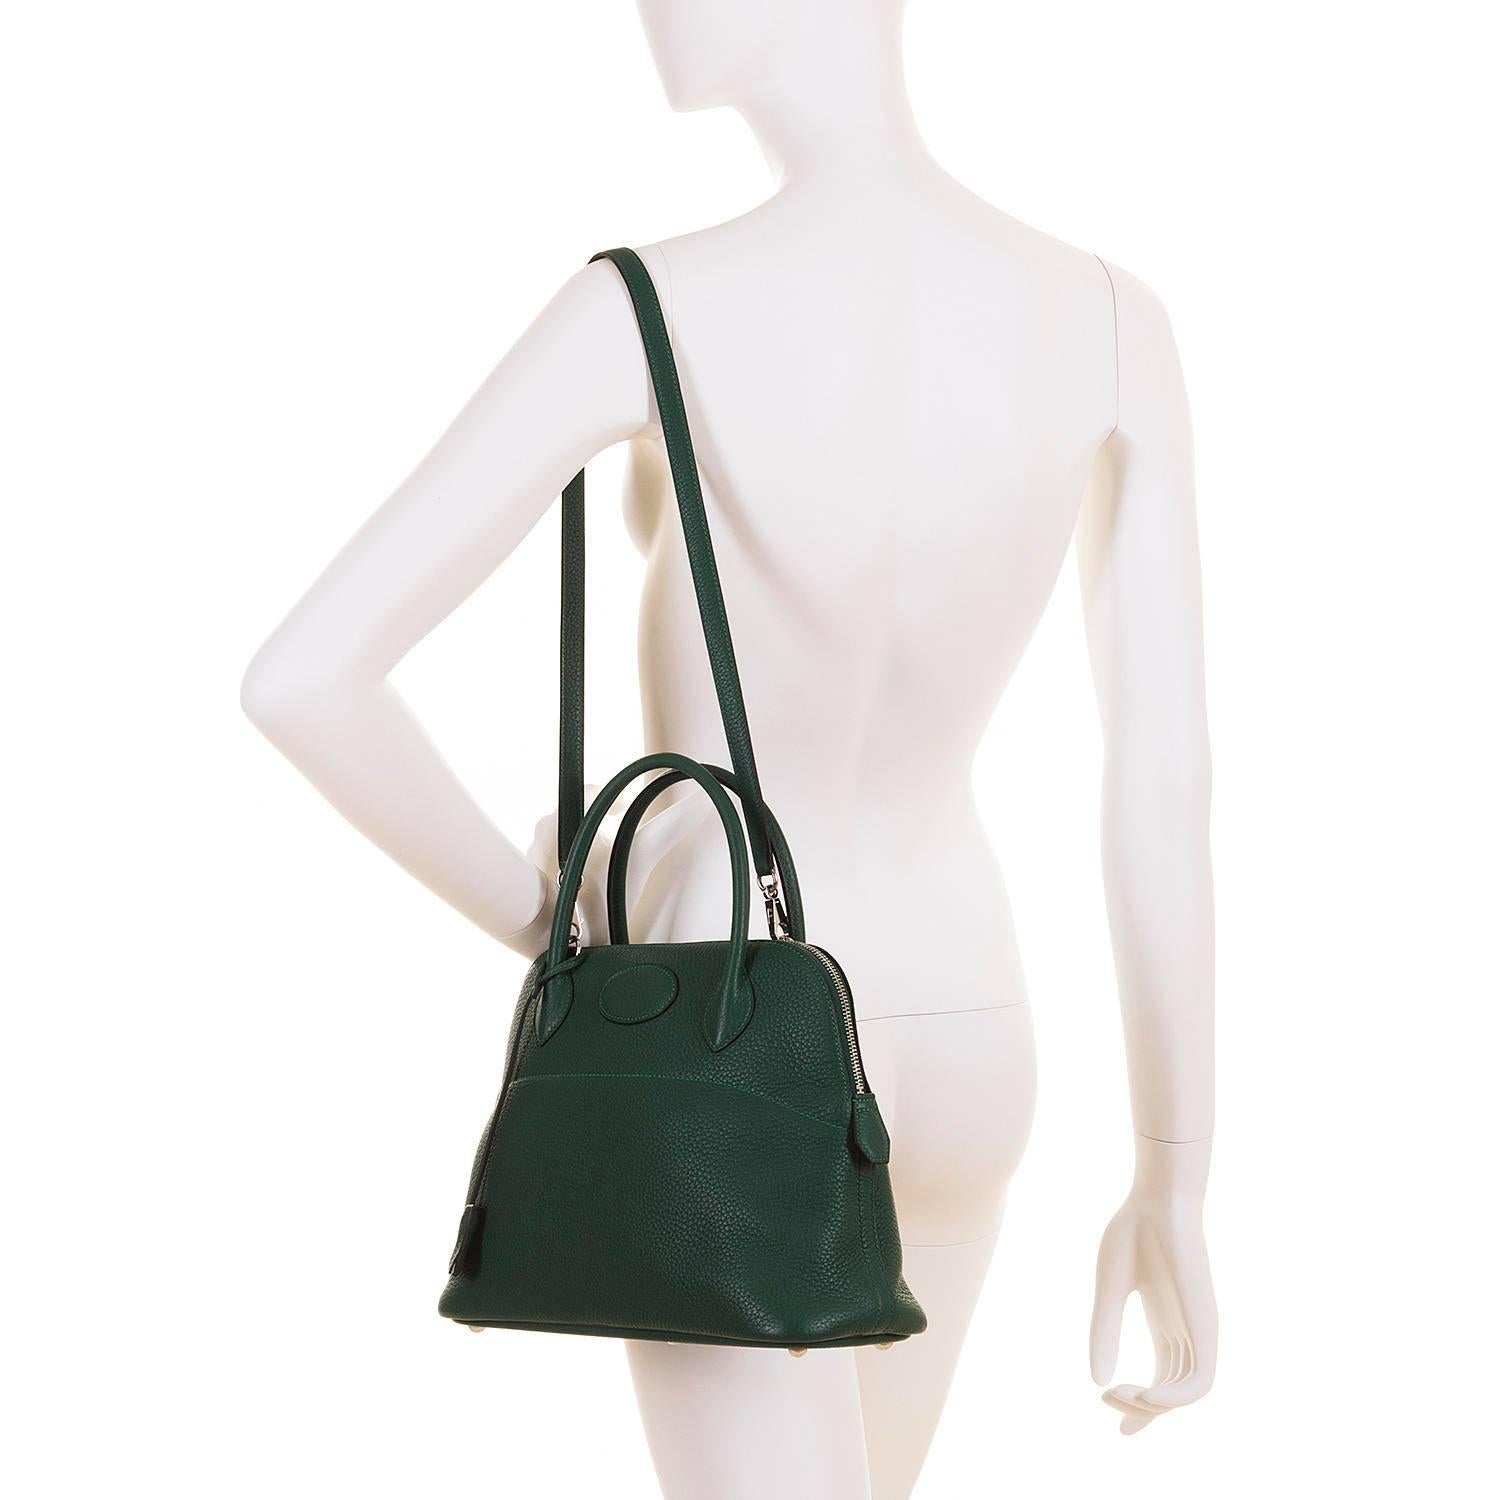 WOW! As New Hermes 31cm Rare 'Malachite Green' Togo Leather Bolide Bag with SHW For Sale 1